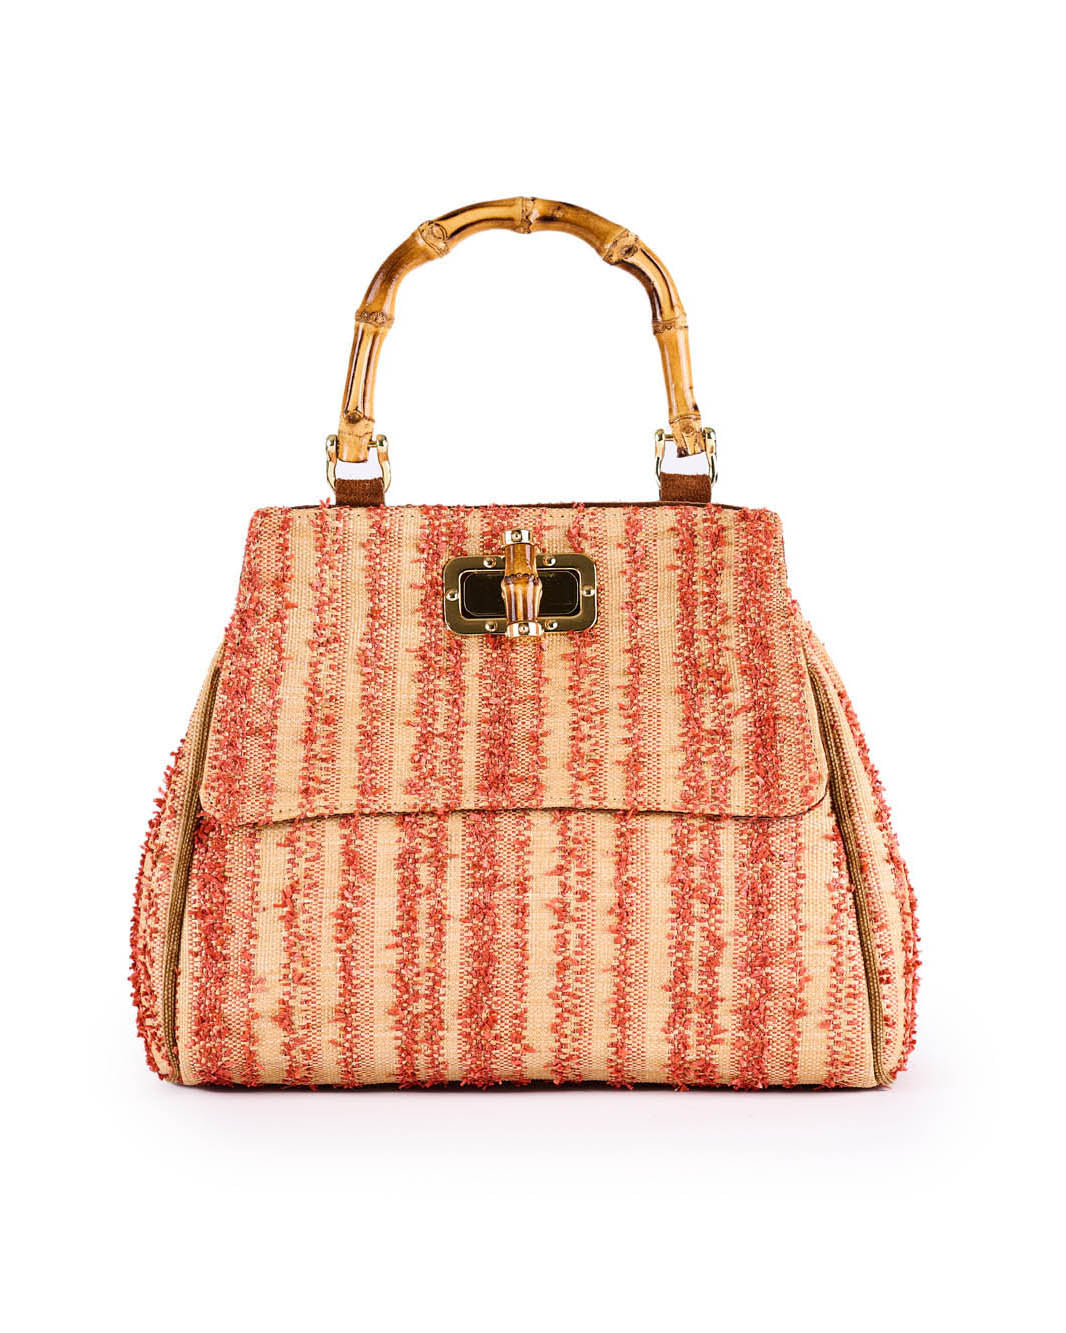 Woven red and beige handbag with bamboo handle